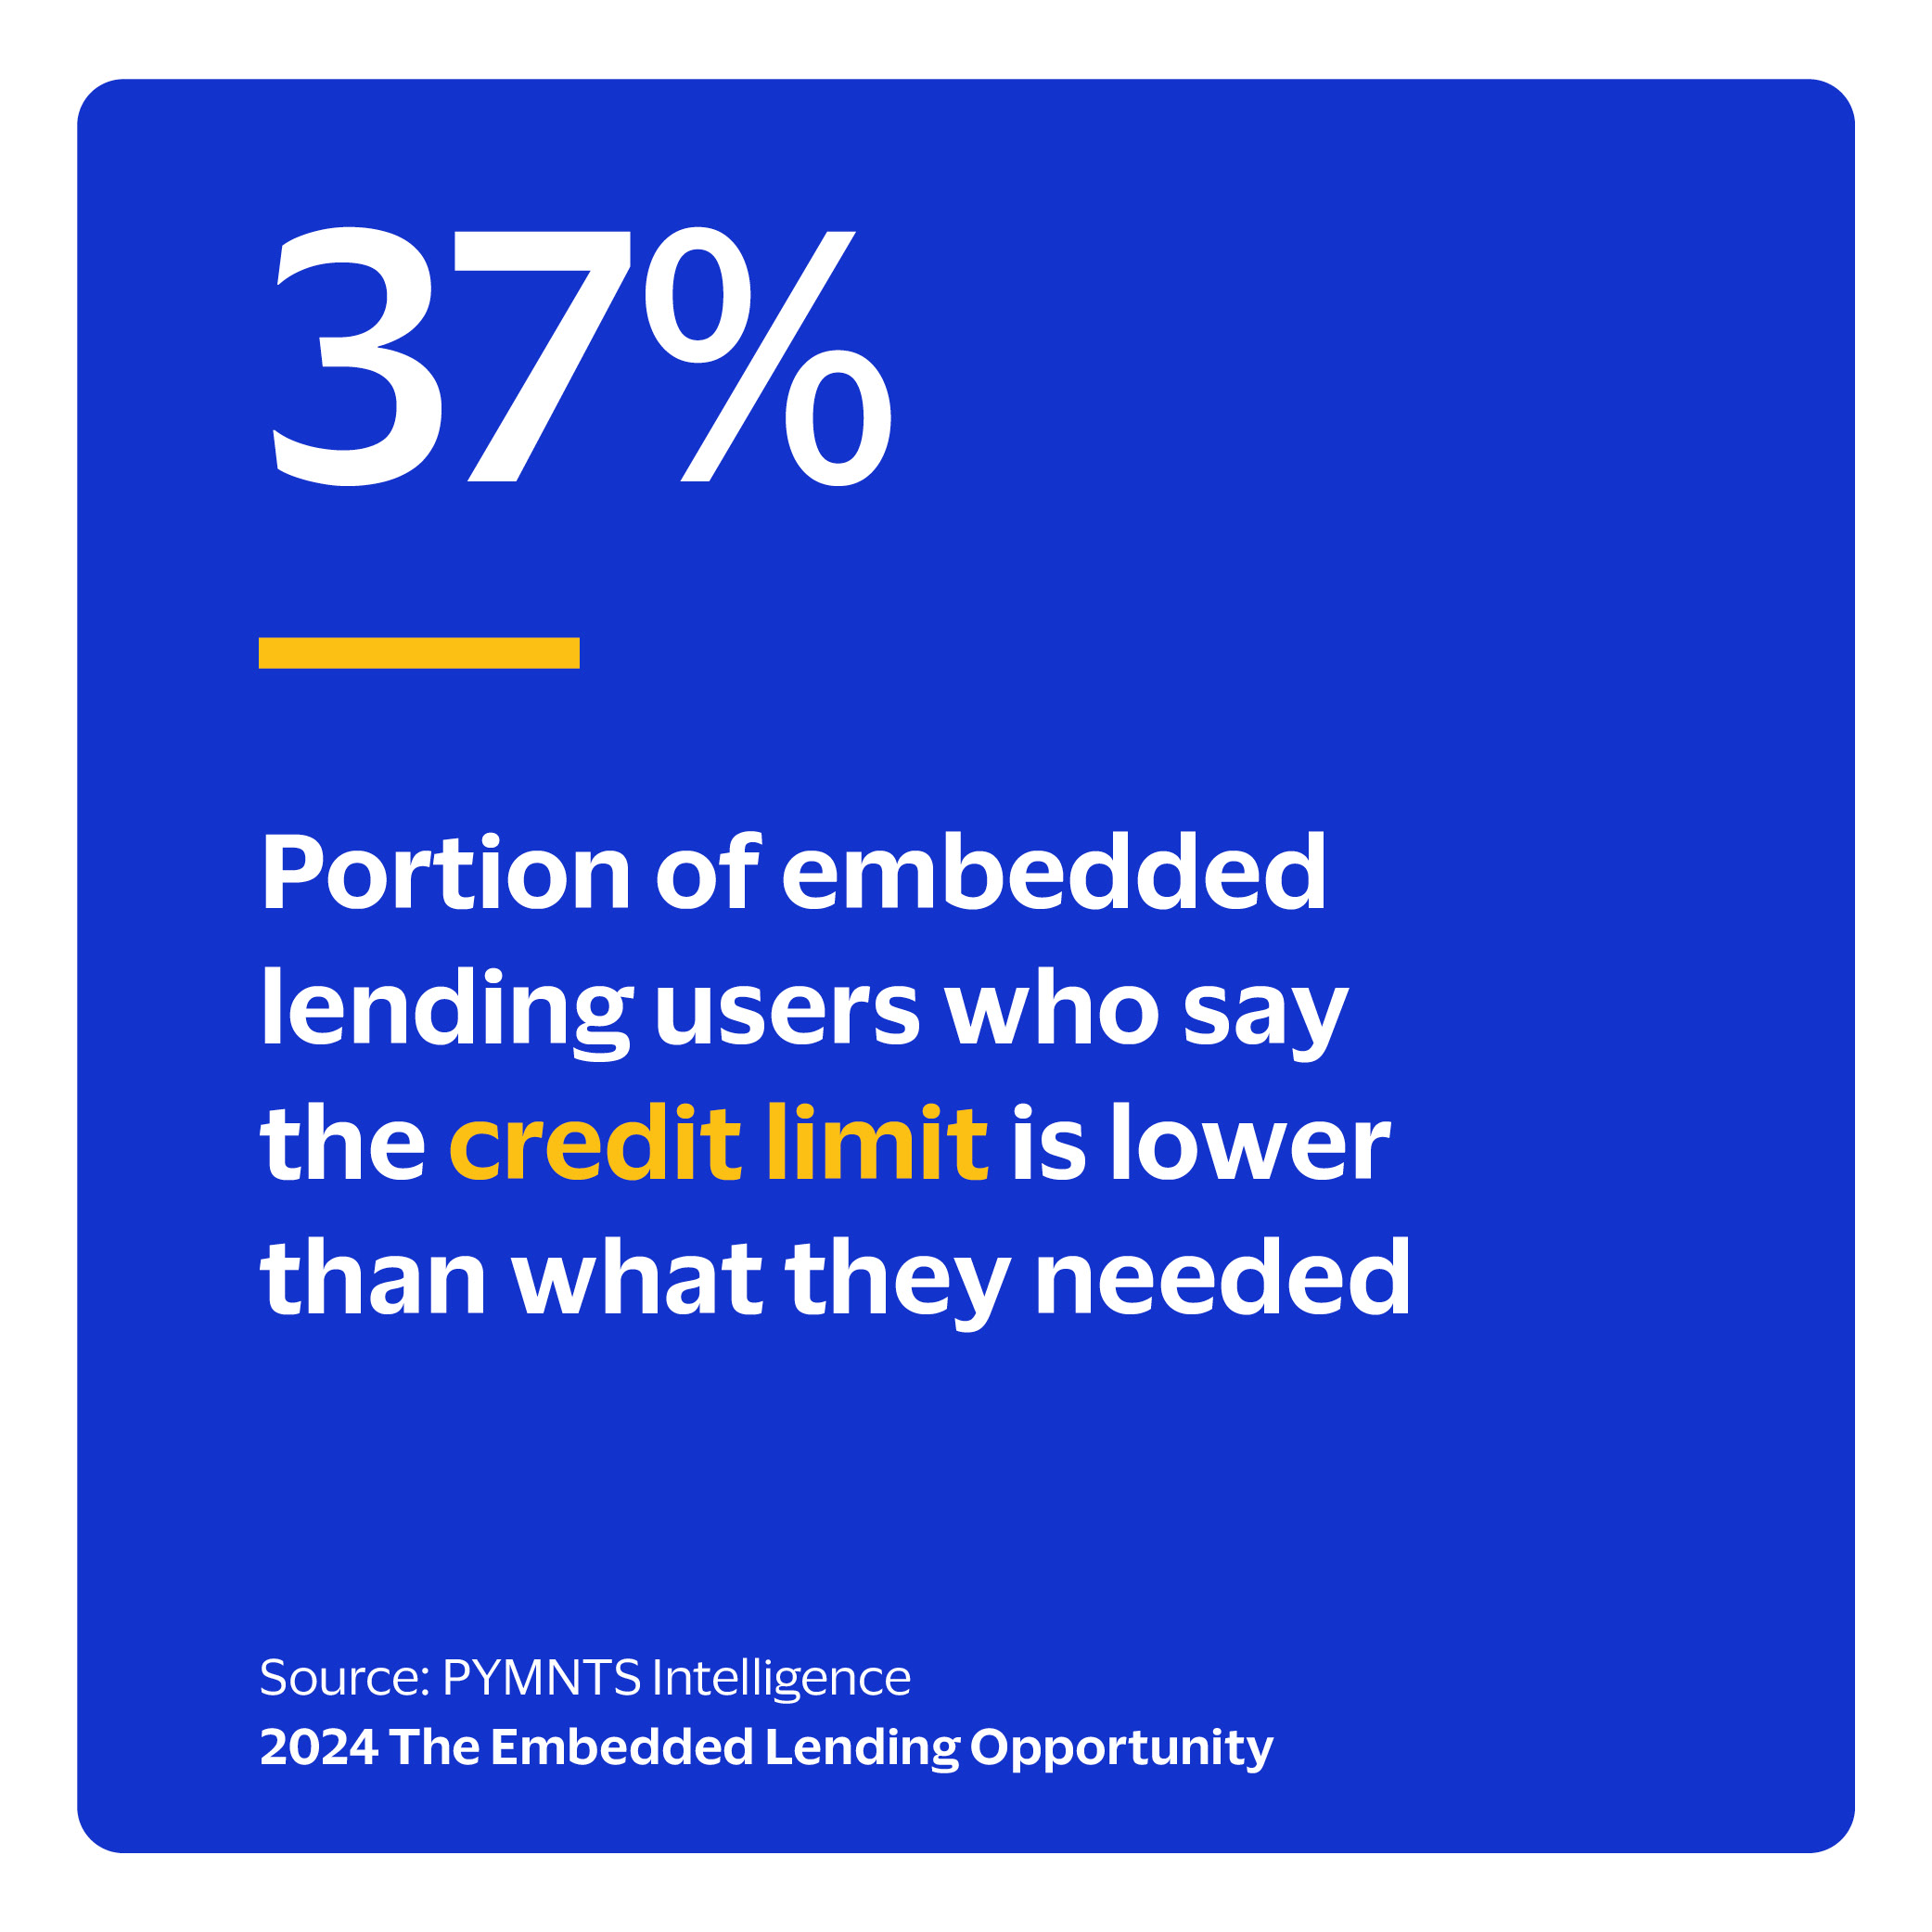  Portion of embedded lending users who say the credit limit is lower than what they needed